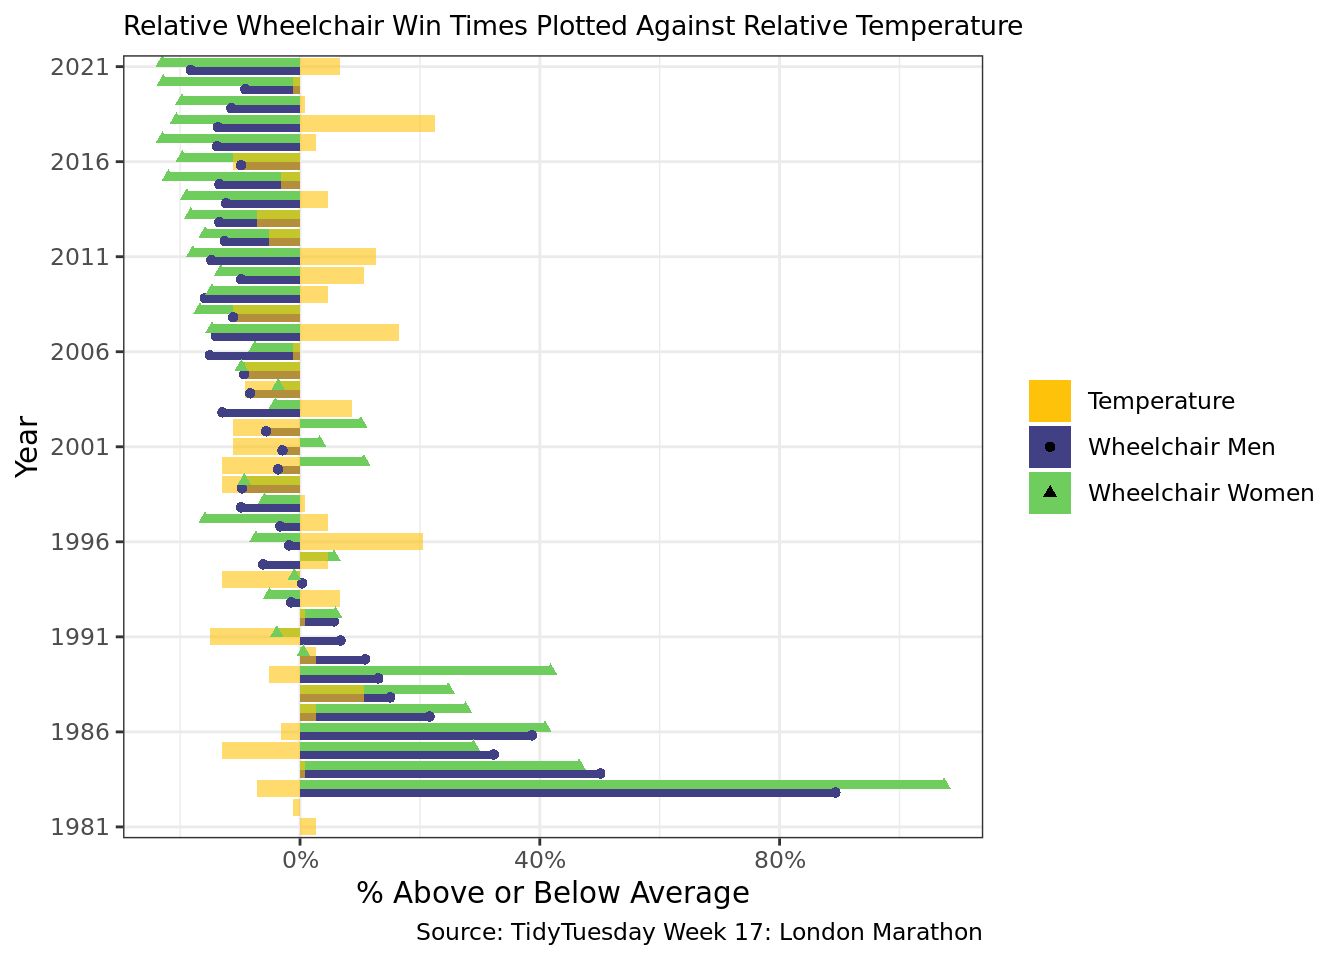 This figure is a column graph titled “Relative Wheelchair Win Times Plotted Against Relative Temperature” that displays relative win times for Men’s and Women’s Wheelchair along with the relative average temperature by year. The plot shows that 2018 had the highest relative temperature and 1991 had the lowest. We are visualizing the relative win time via a sideways bar chart rather than a line chart which was used in the first two plots.